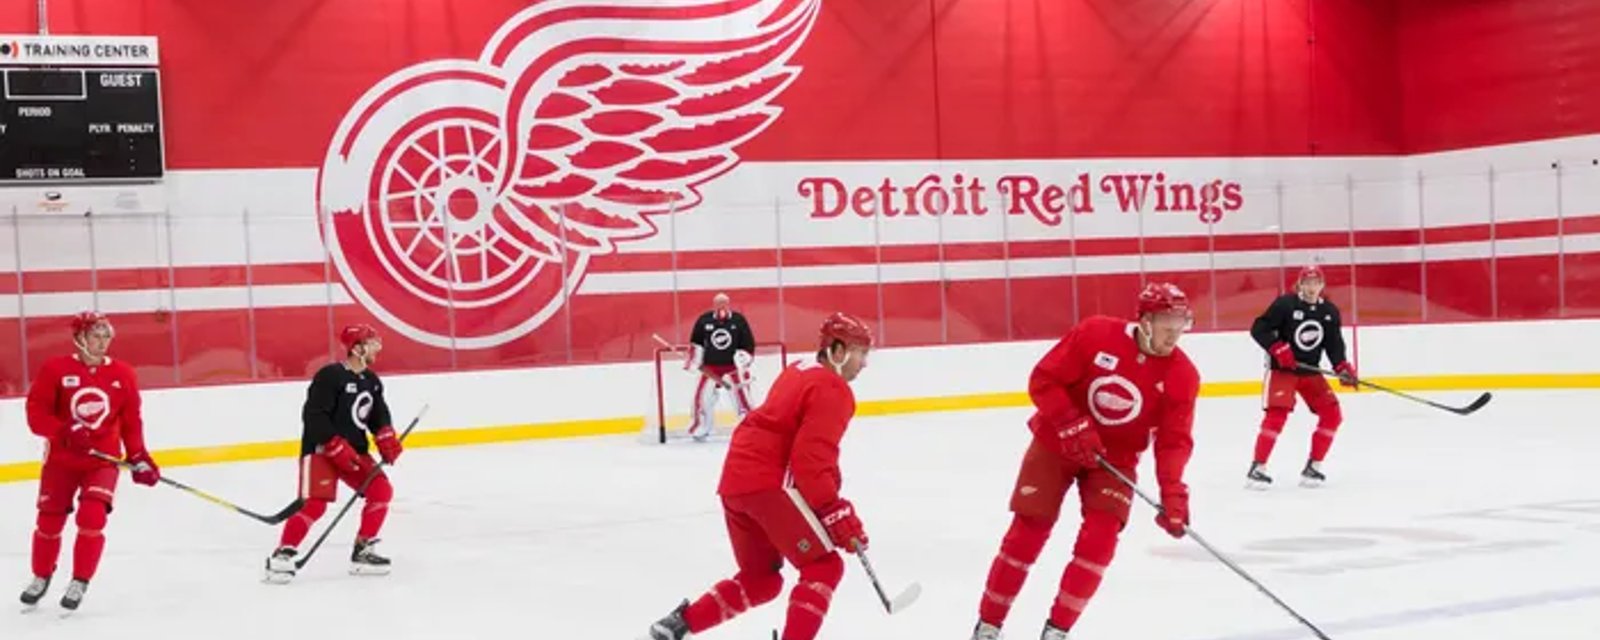 Top Red Wings prospect won't play in Detroit any time soon 